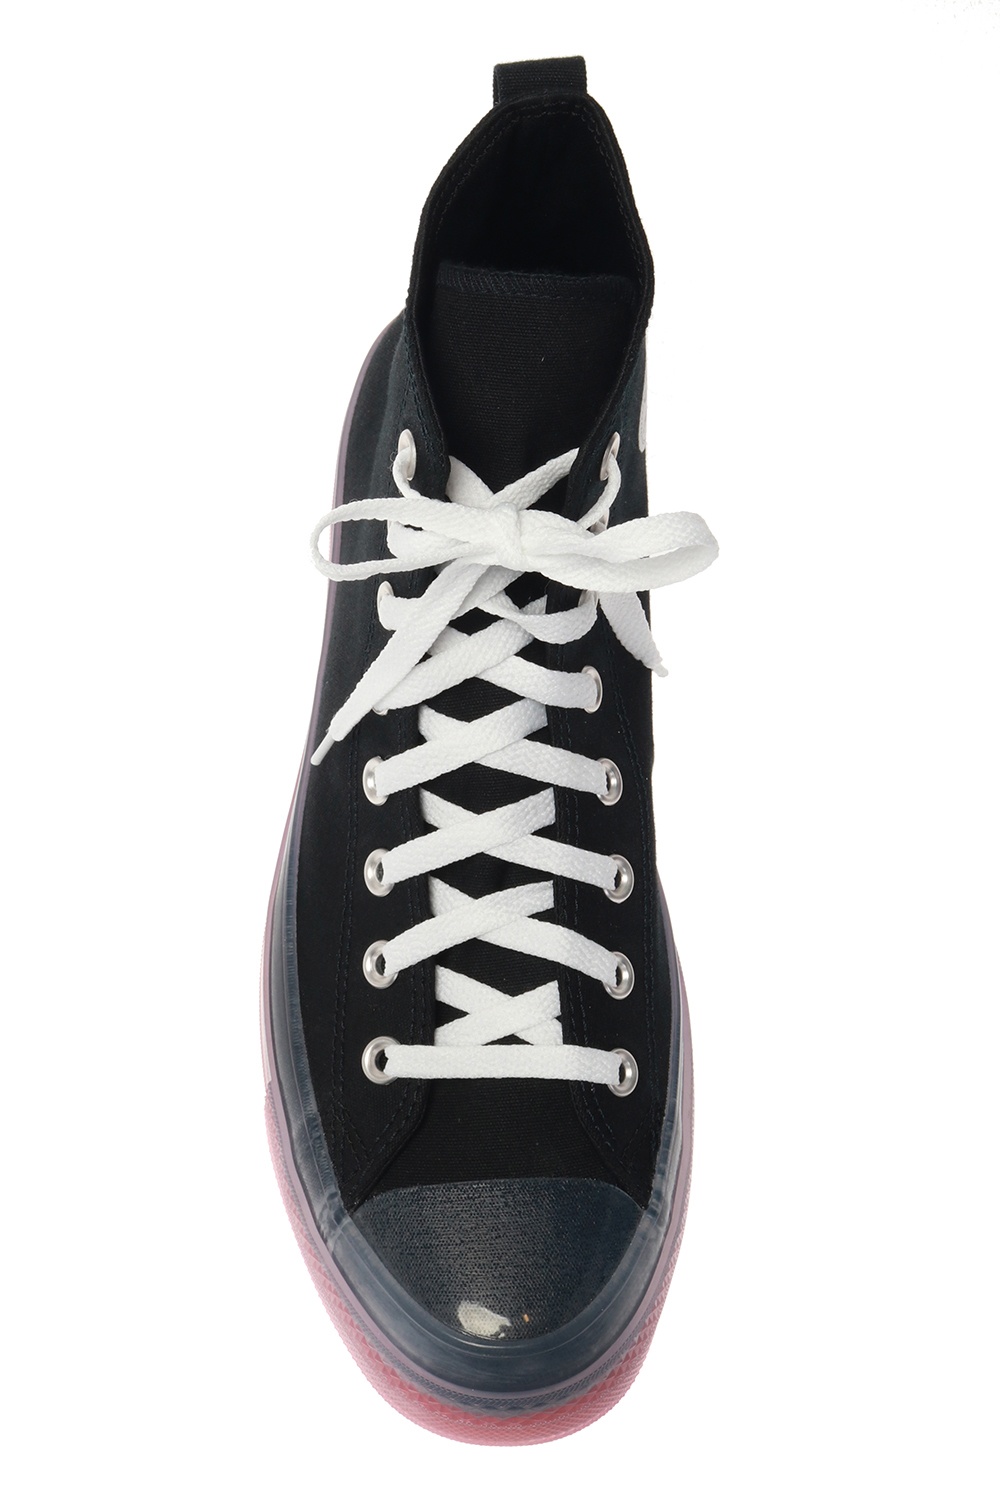 Converse ‘Chuck Taylor All Star CX’ high-top sneakers